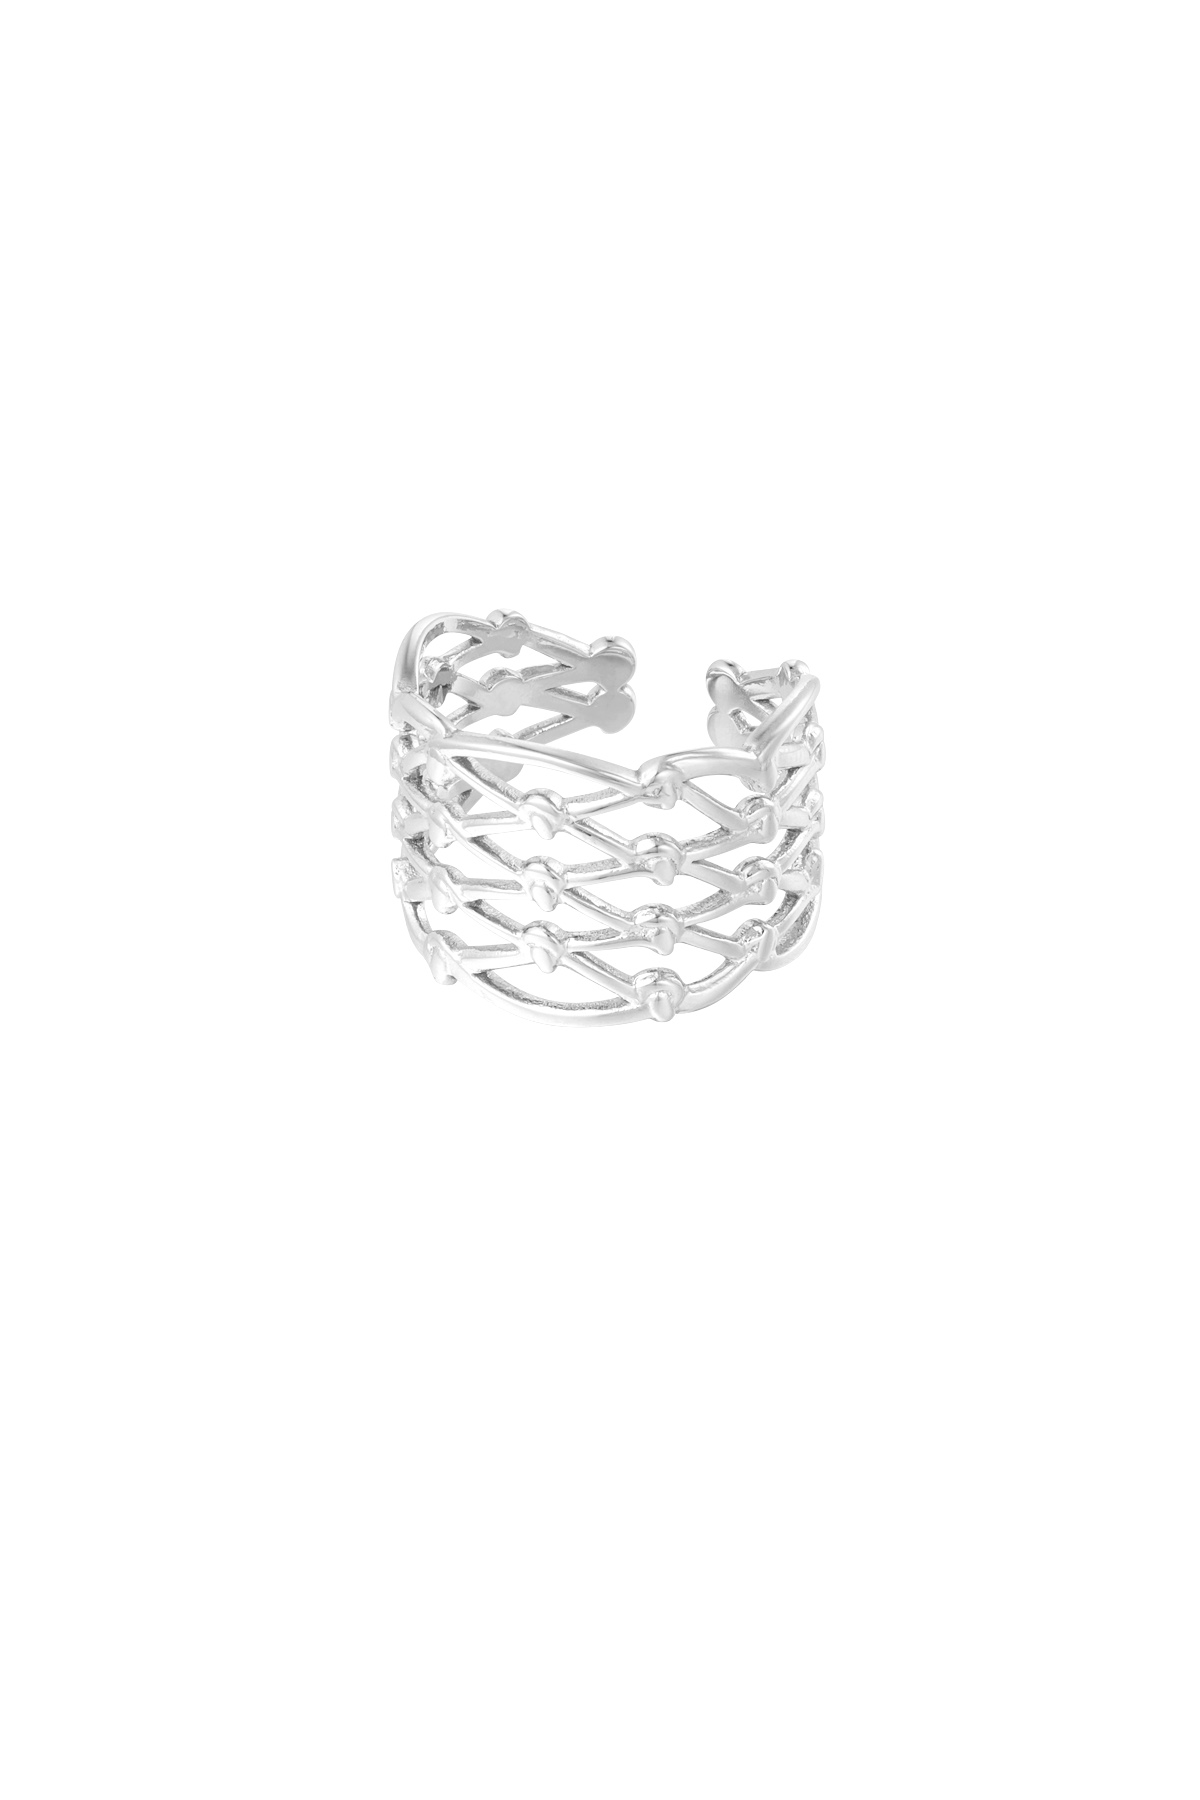 Ring mit Knotendrehung – Silber 